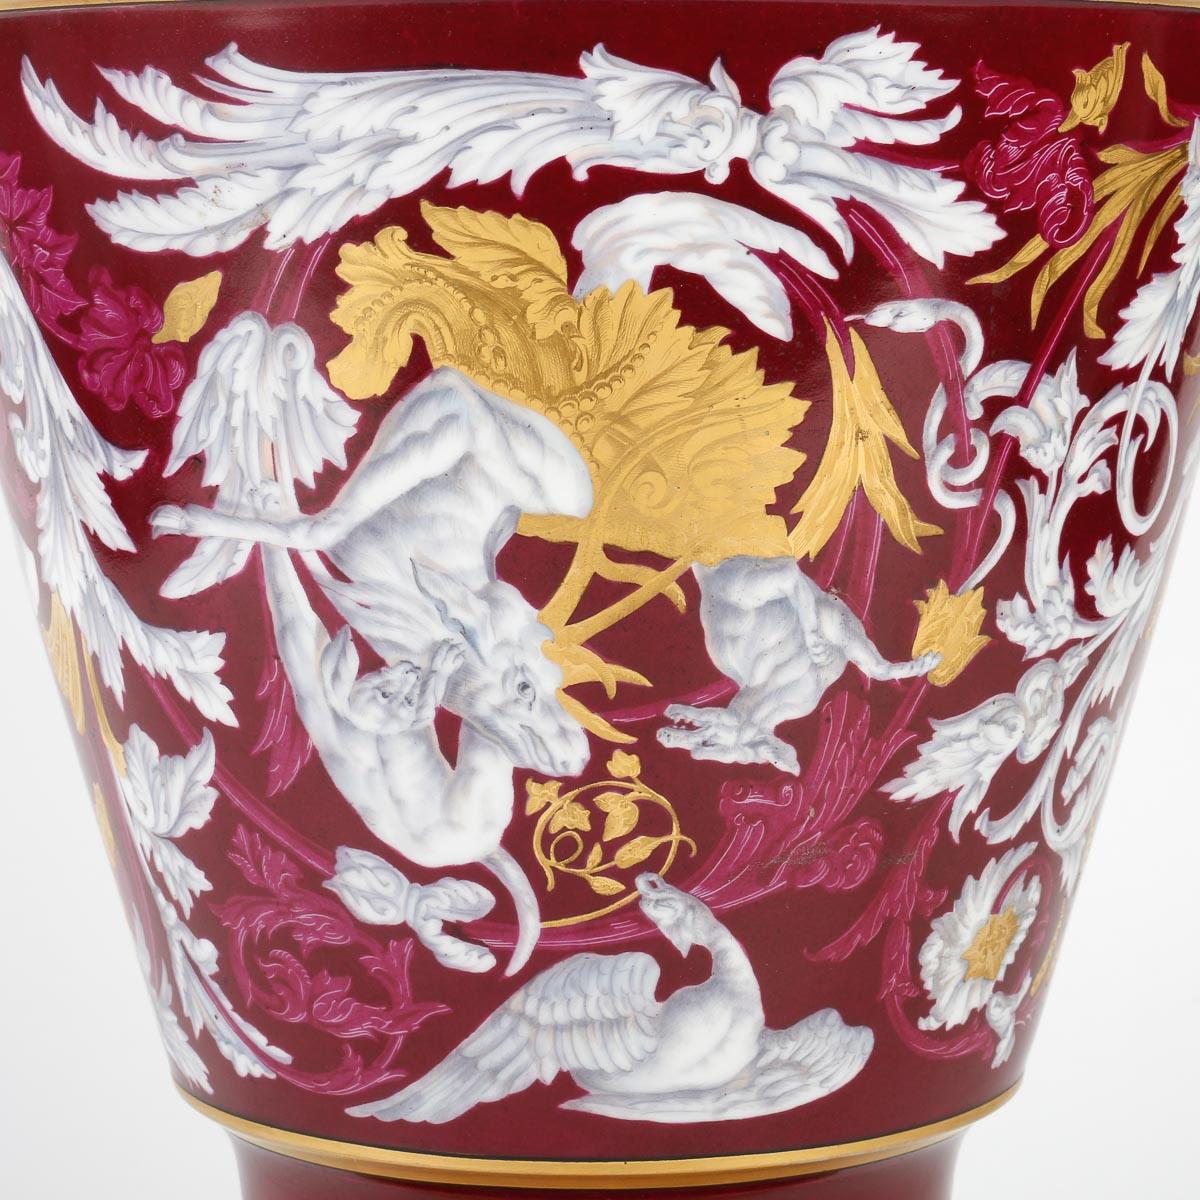 Large 19th Century Enamelled Porcelain Vase.

Enamelled porcelain vase by Laroche & Pannier, made for the Crystal Staircase shop in the Palais Royal, 19th century, Napoleon III period.

H: 50cm, d: 30cm